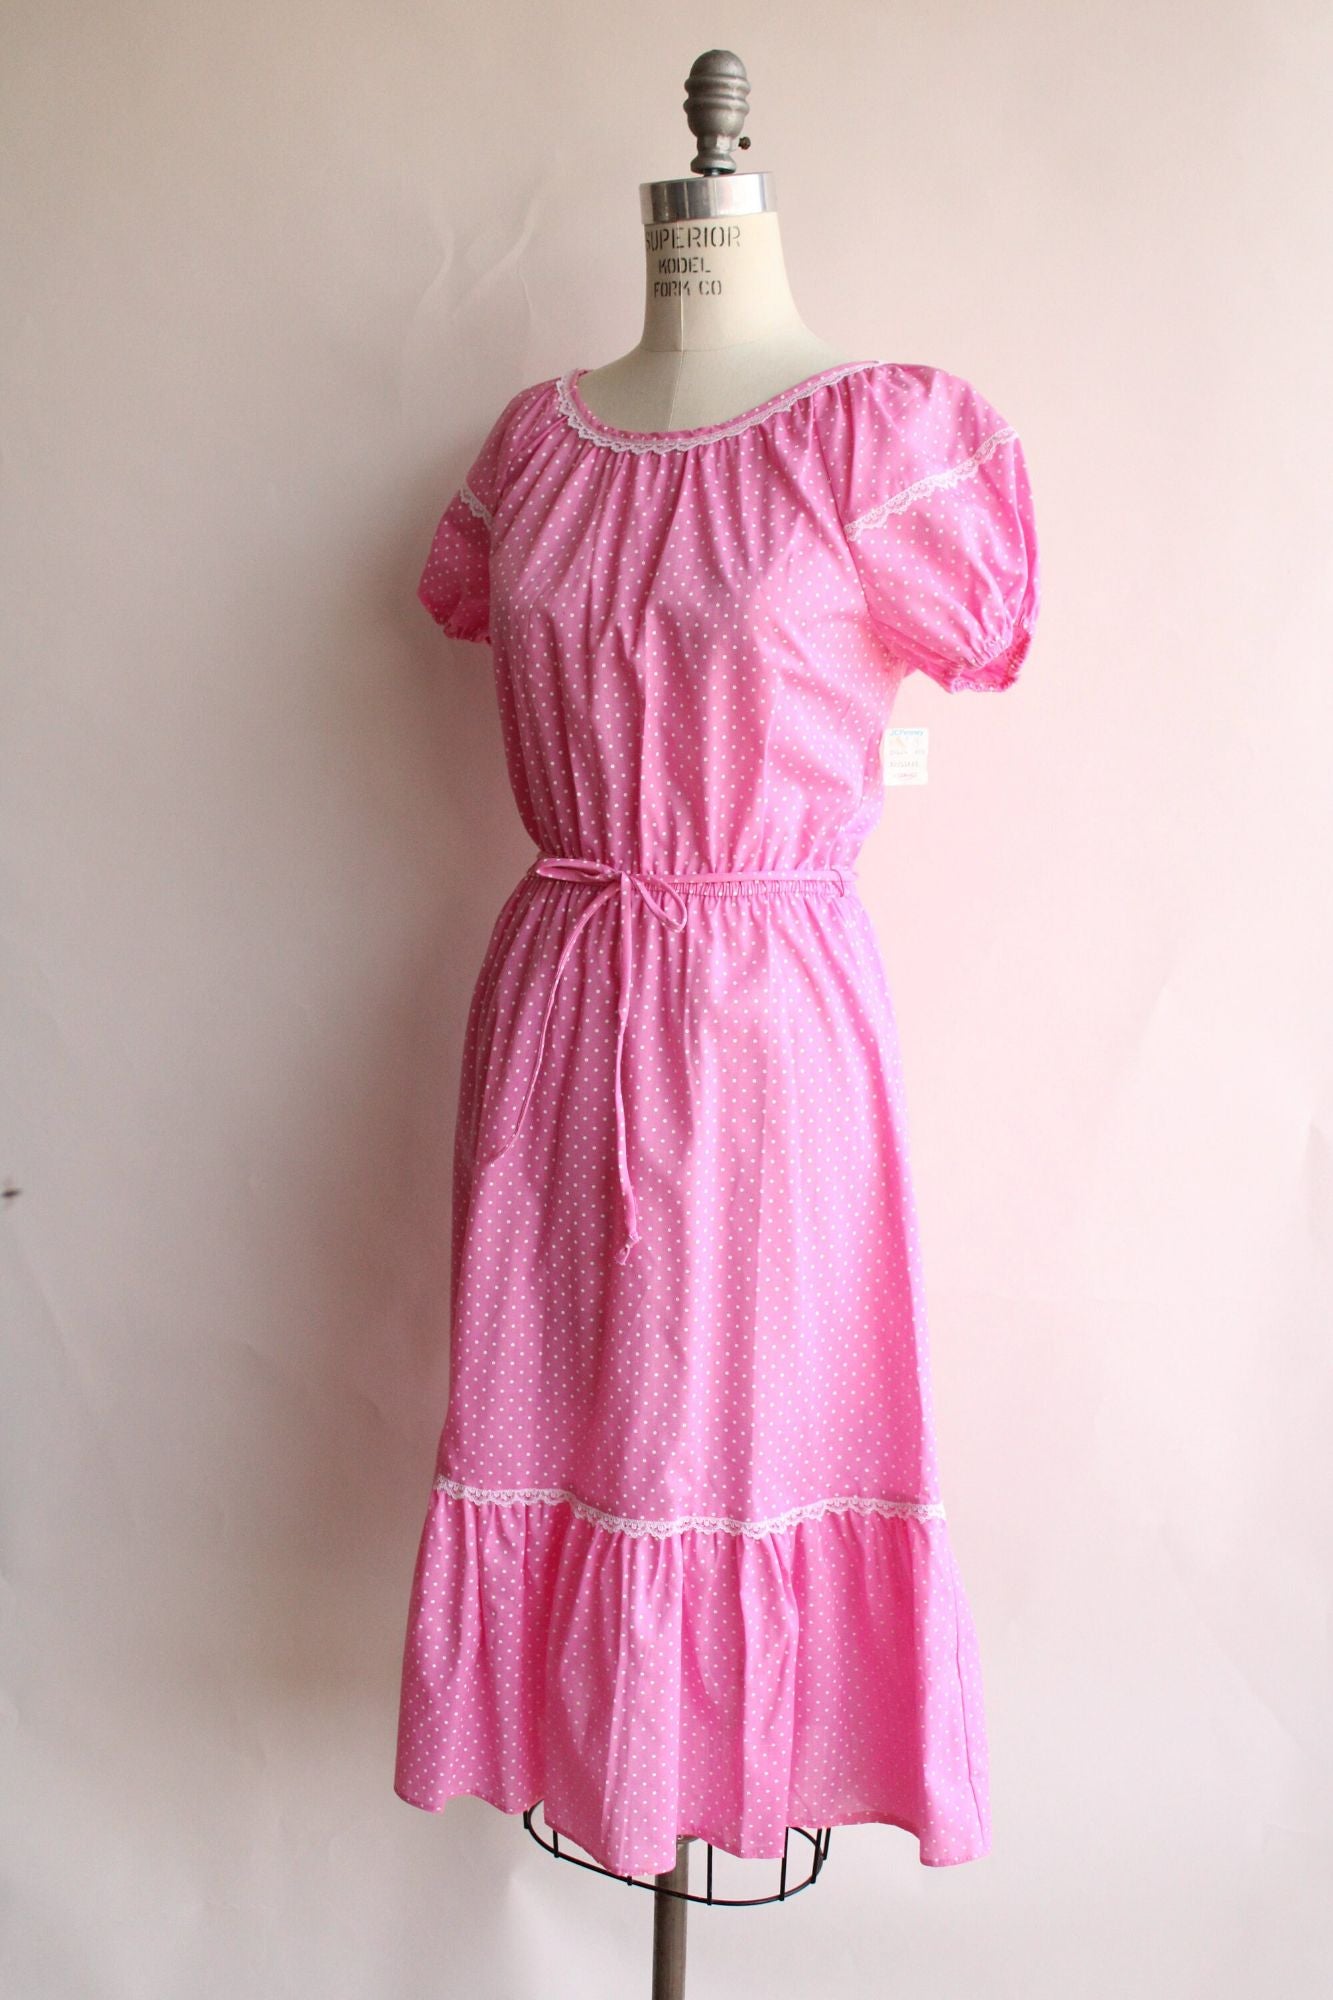 Vintage 1980's Pink Polka Dot Dress with Belt, New with Tags